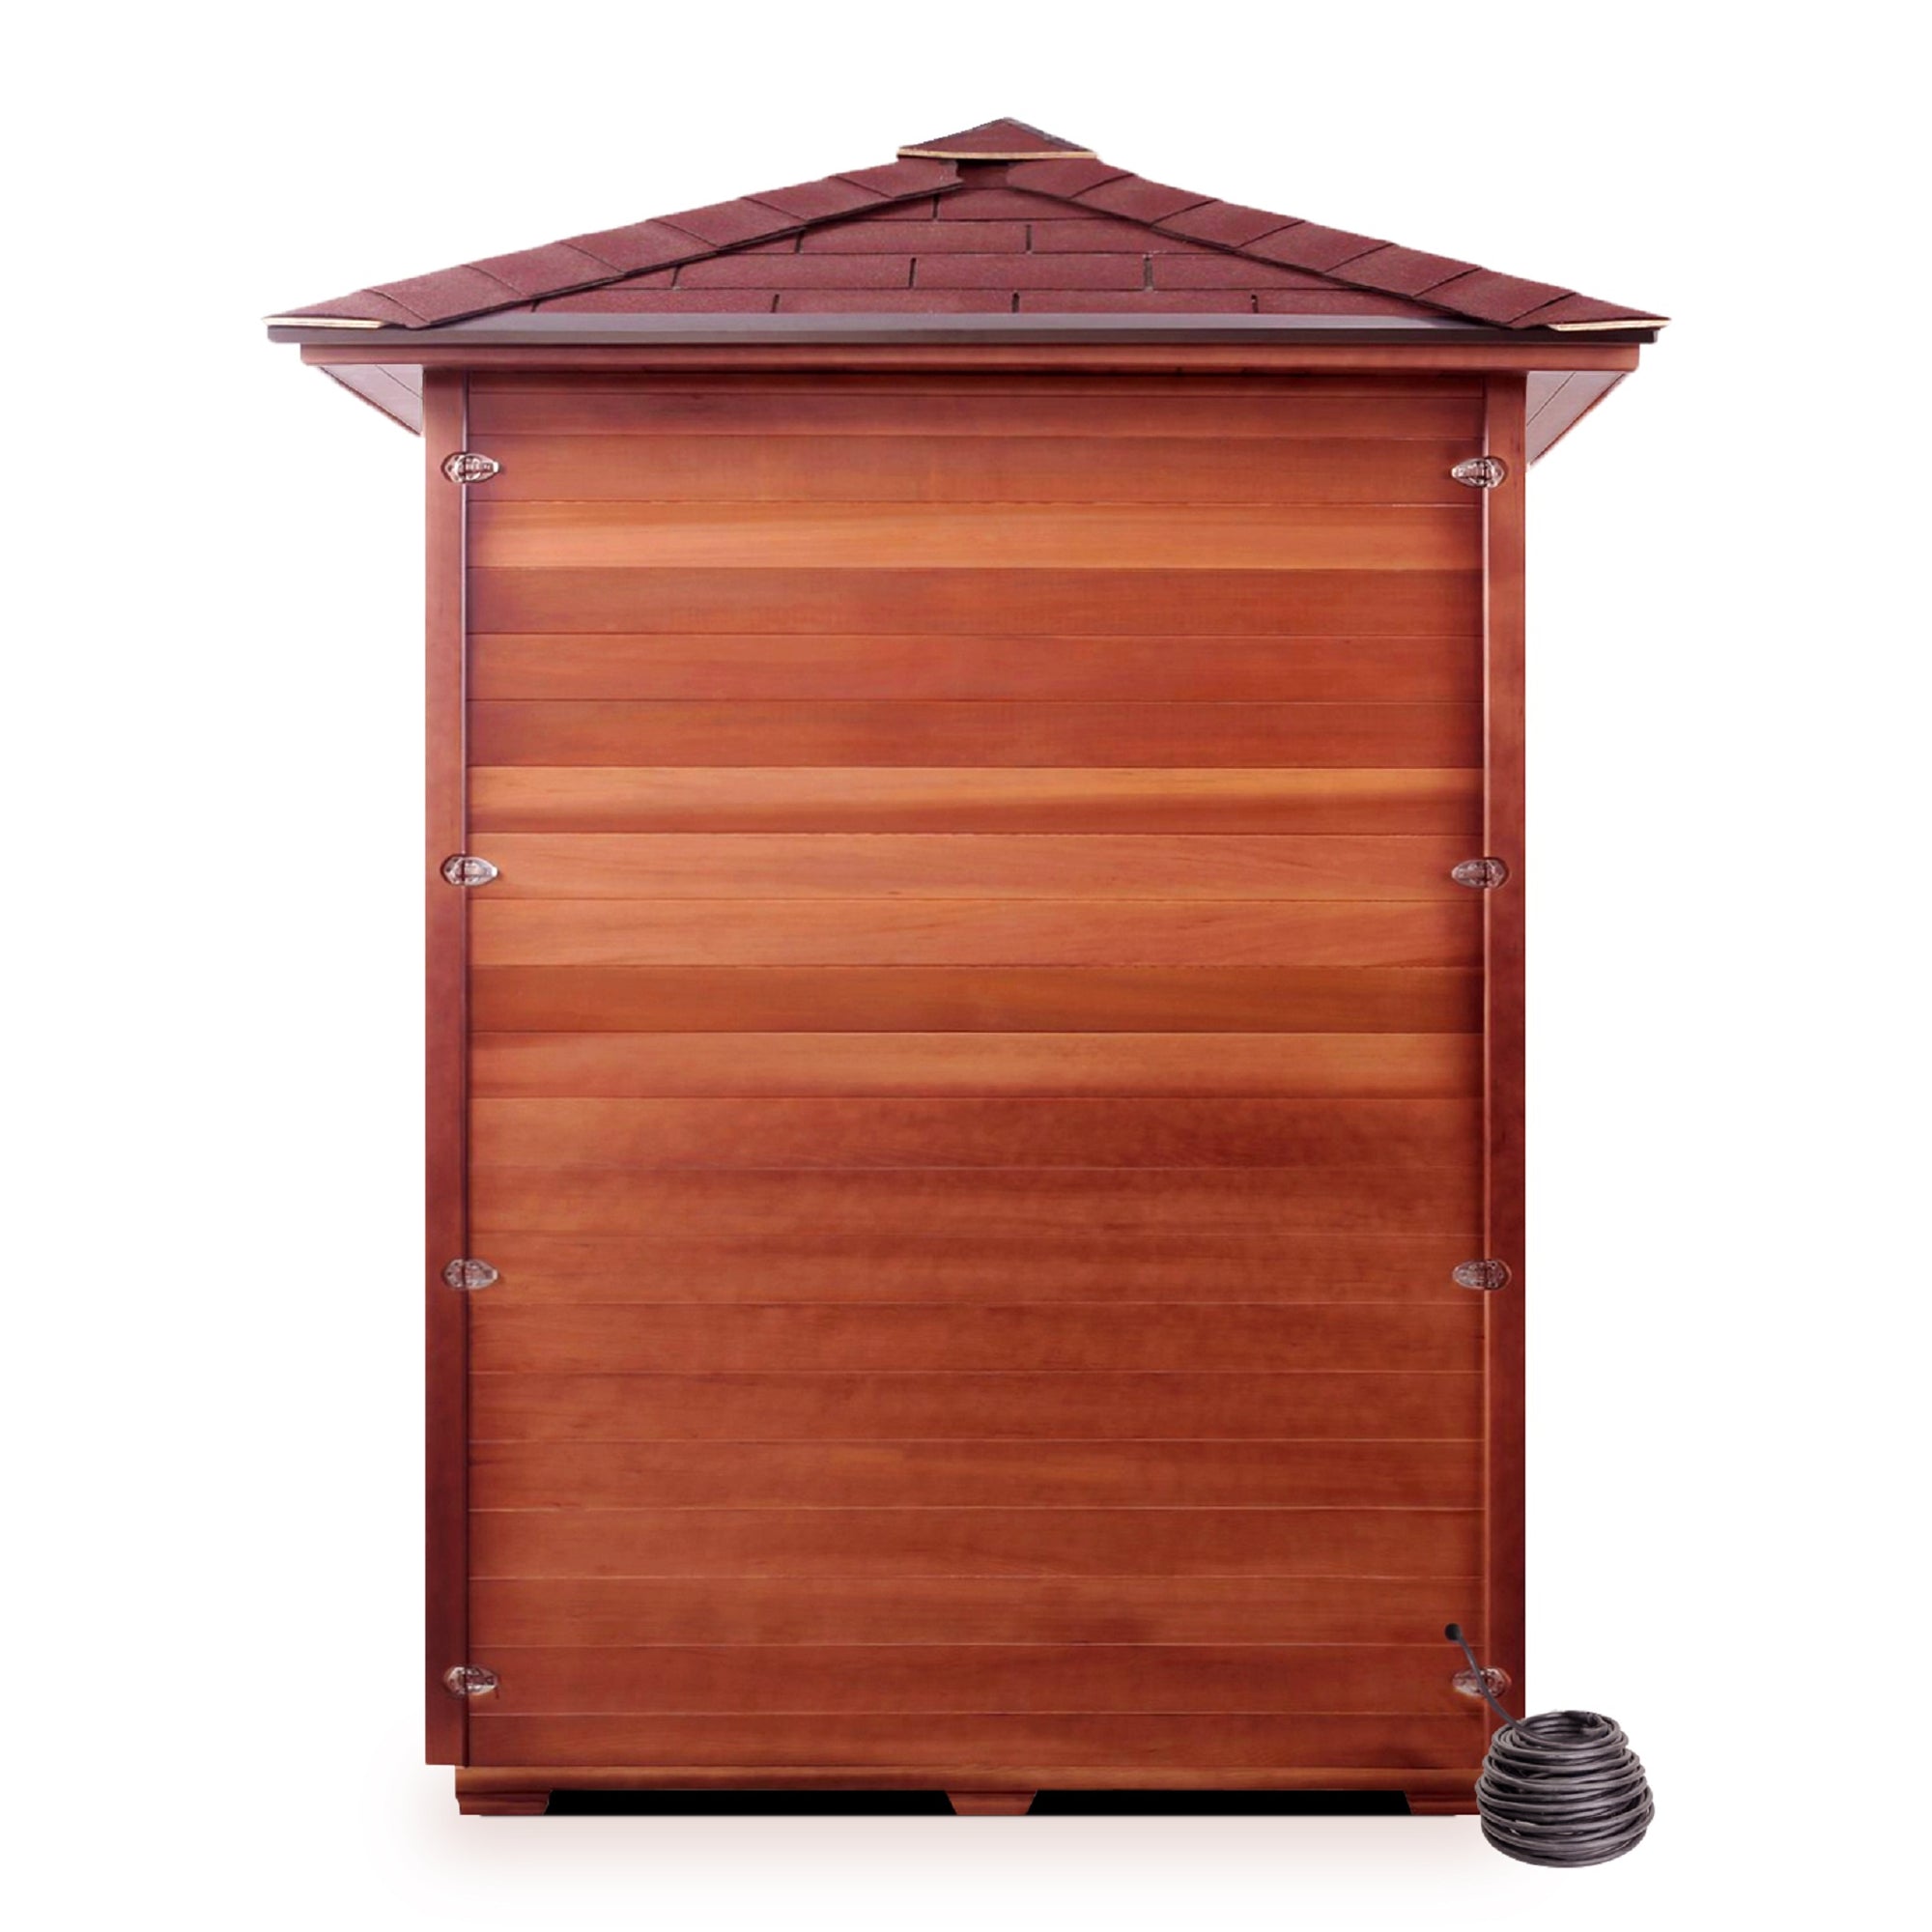 Enlighten Sauna Dry traditional SunRise Outdoor Canadian Red Cedar Wood Outside And Inside Peak Roofed four person corner location sauna with glass door front view